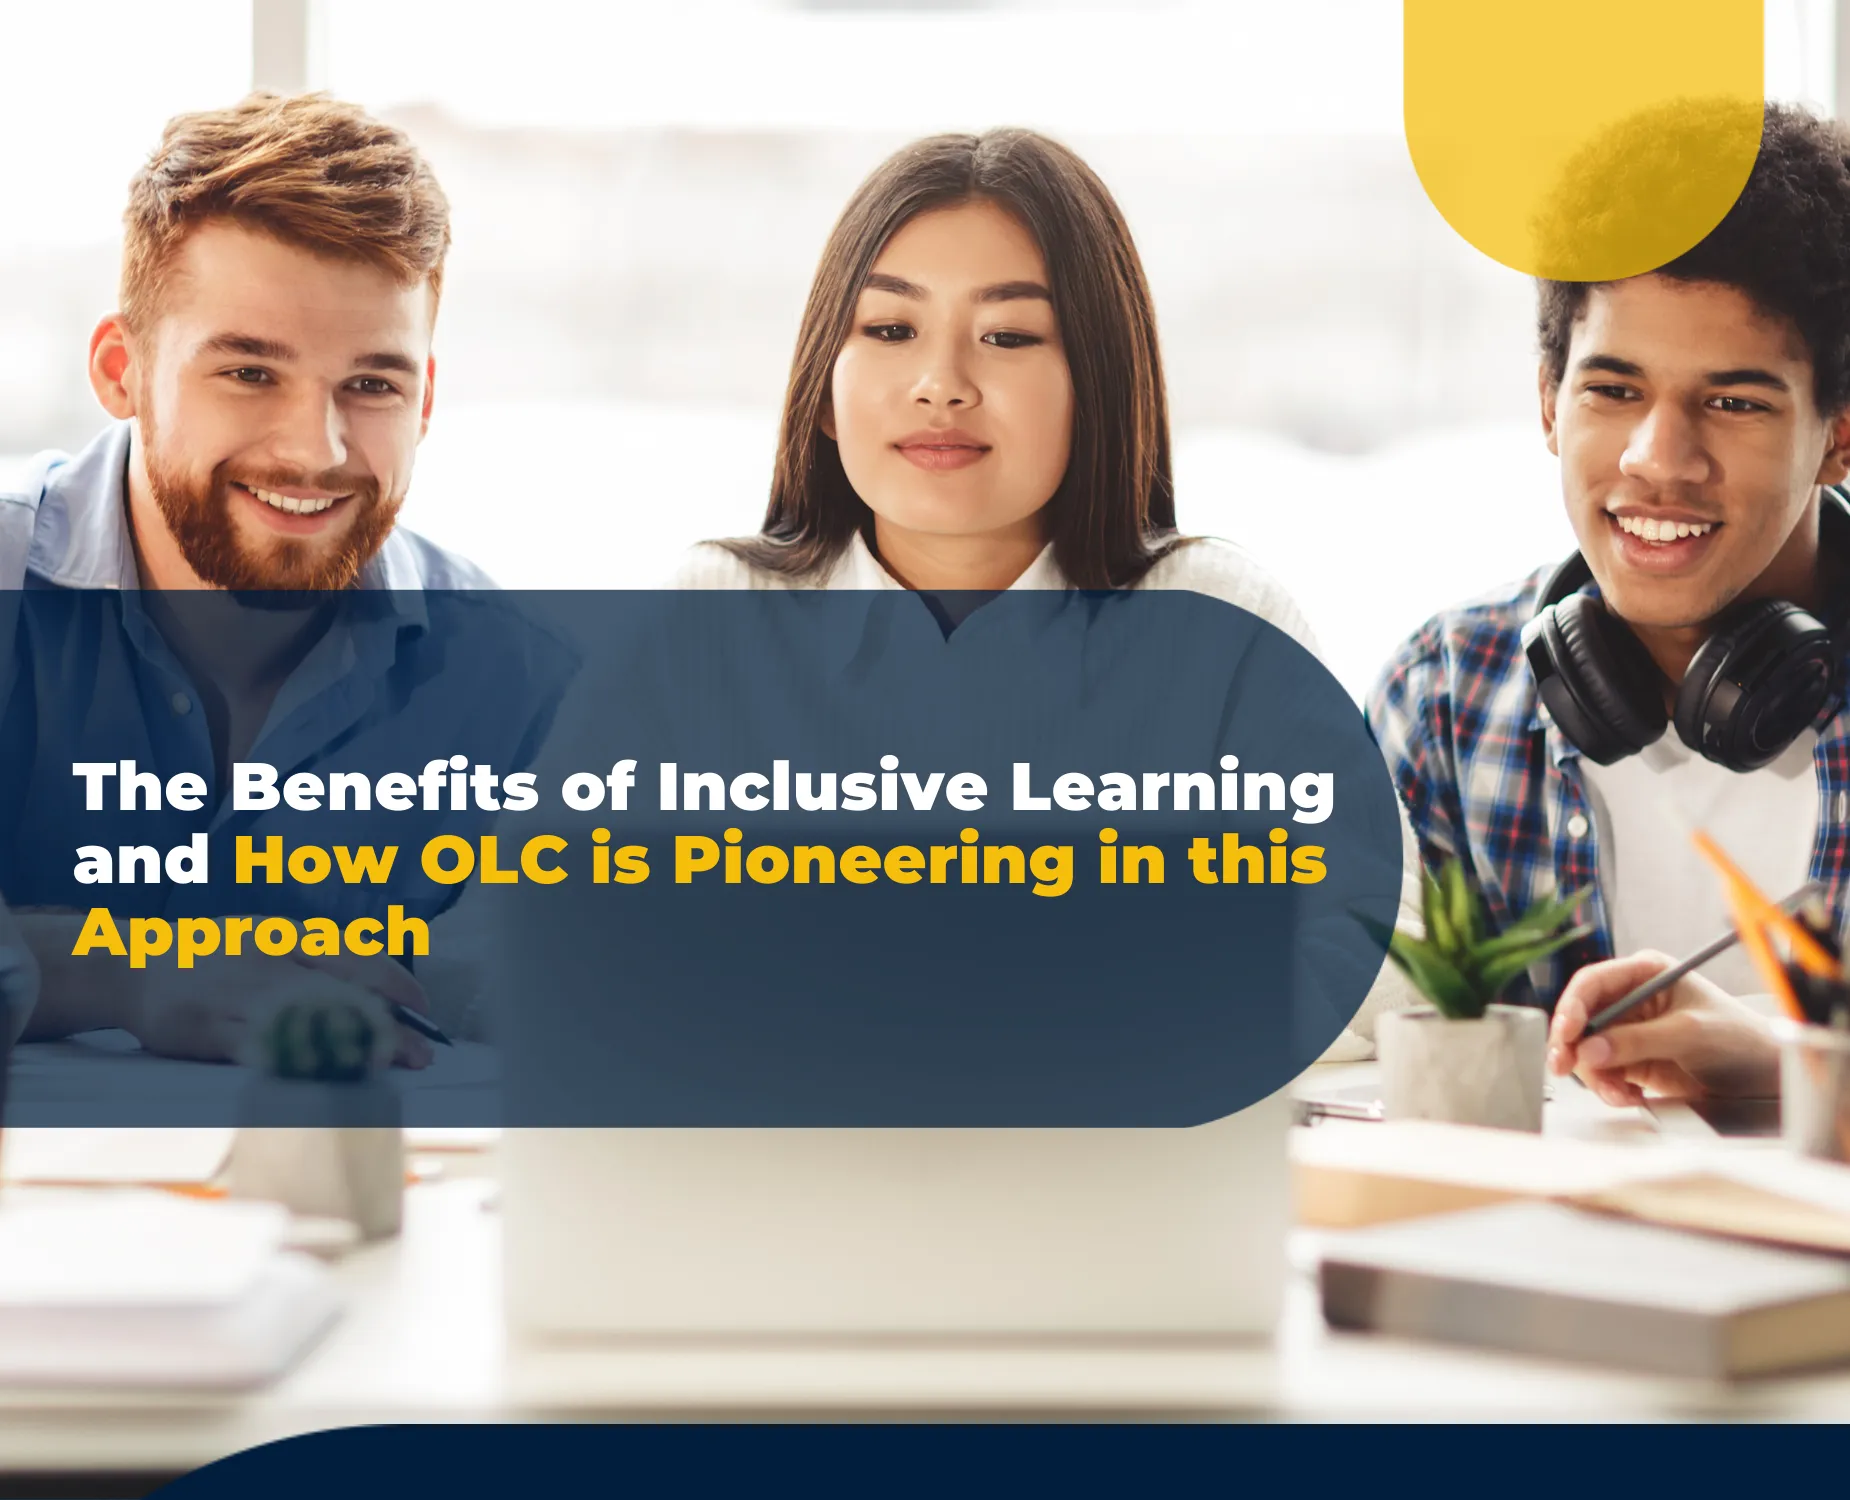 The Benefits of Inclusive Learning and How OLC is Pioneering in this Approach